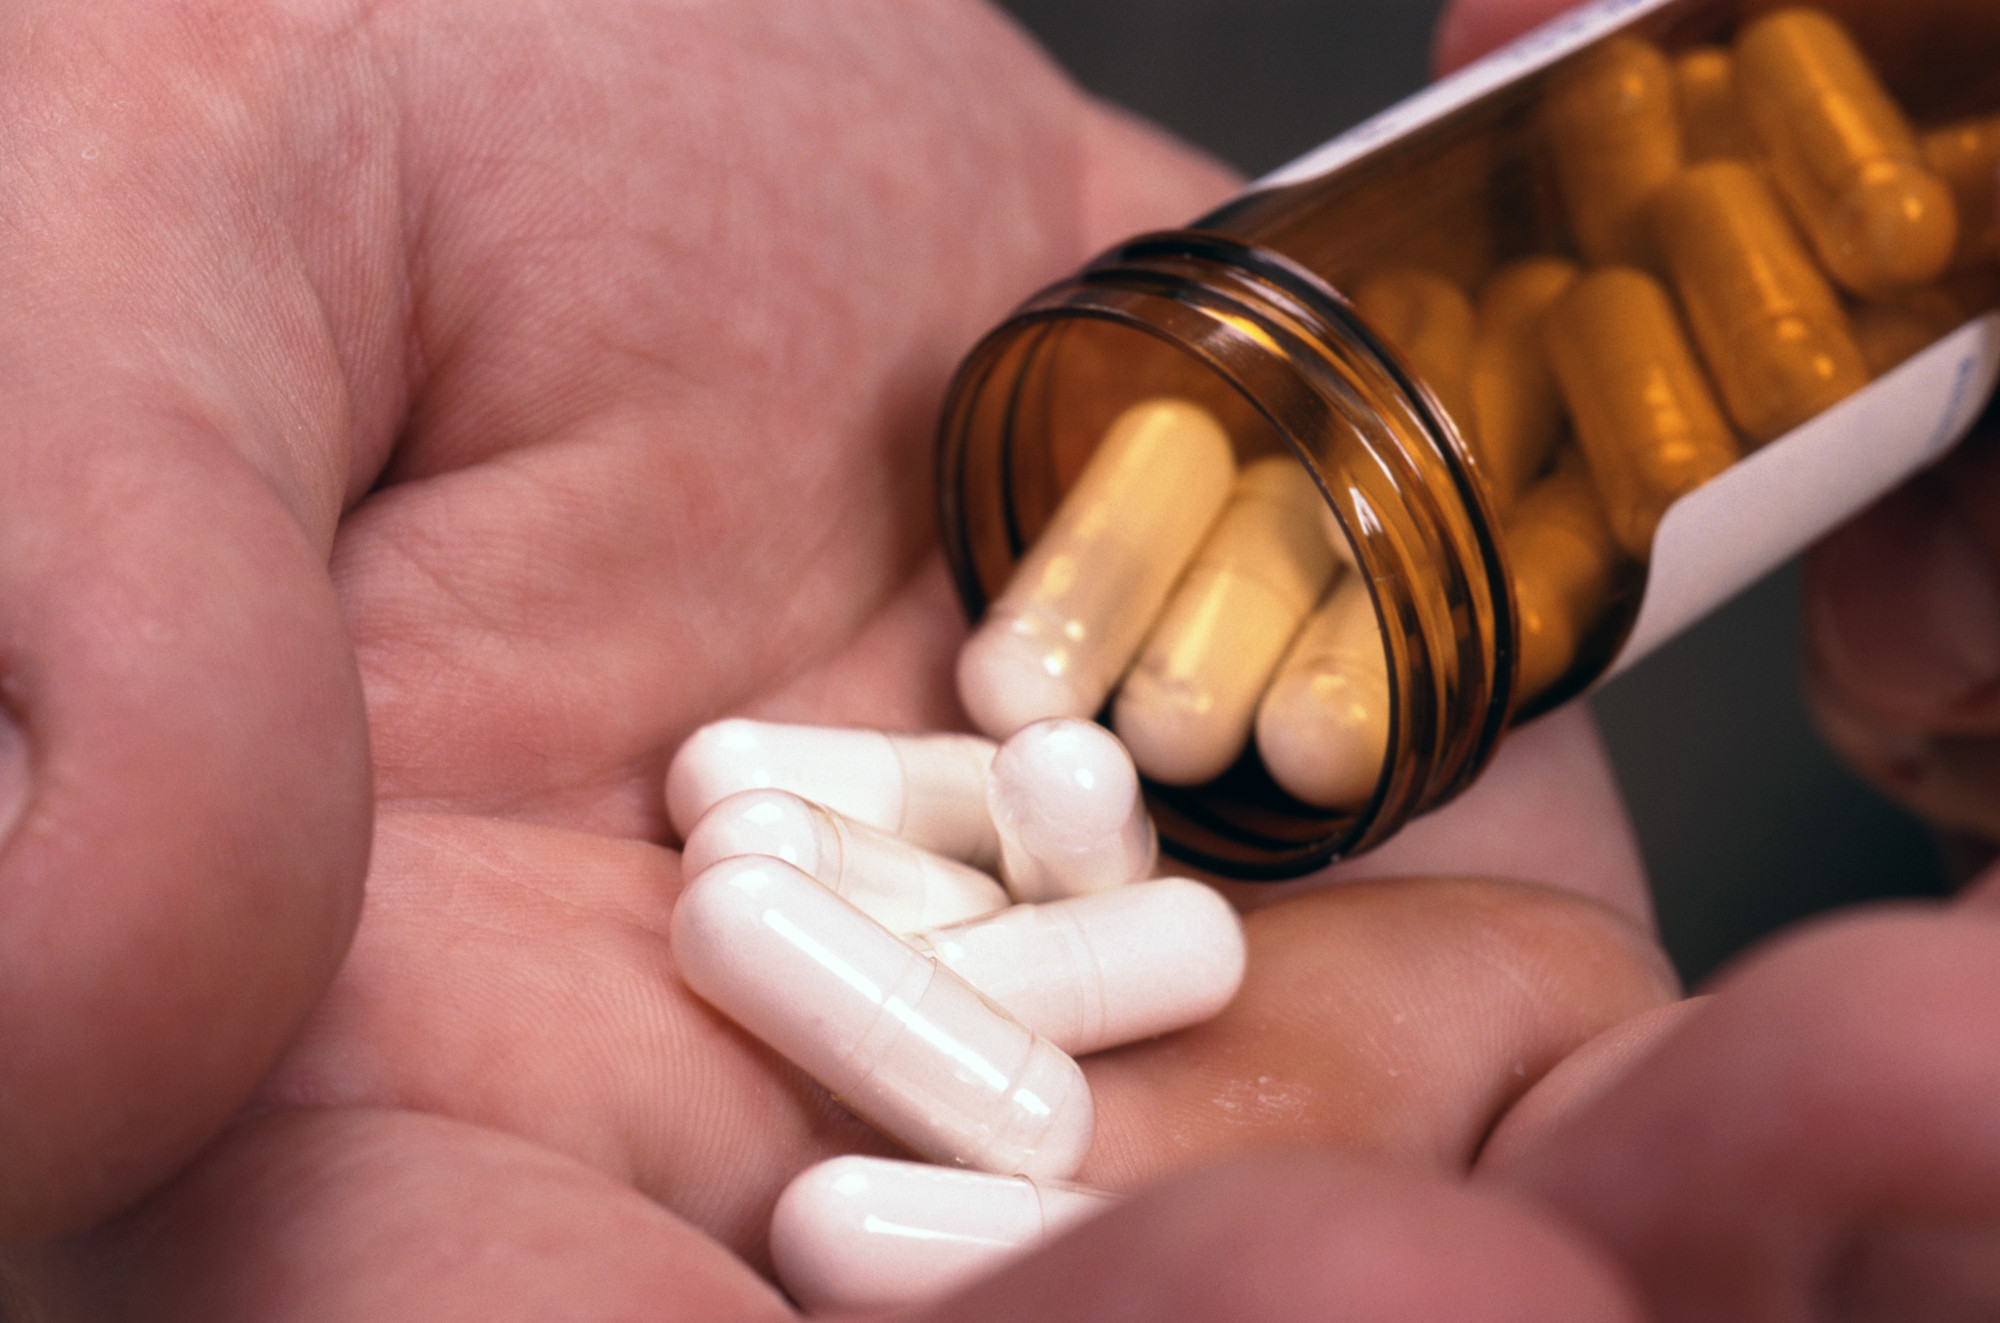 Top 5 Ways You Can Help Prevent Antibiotic Resistance | HuffPost